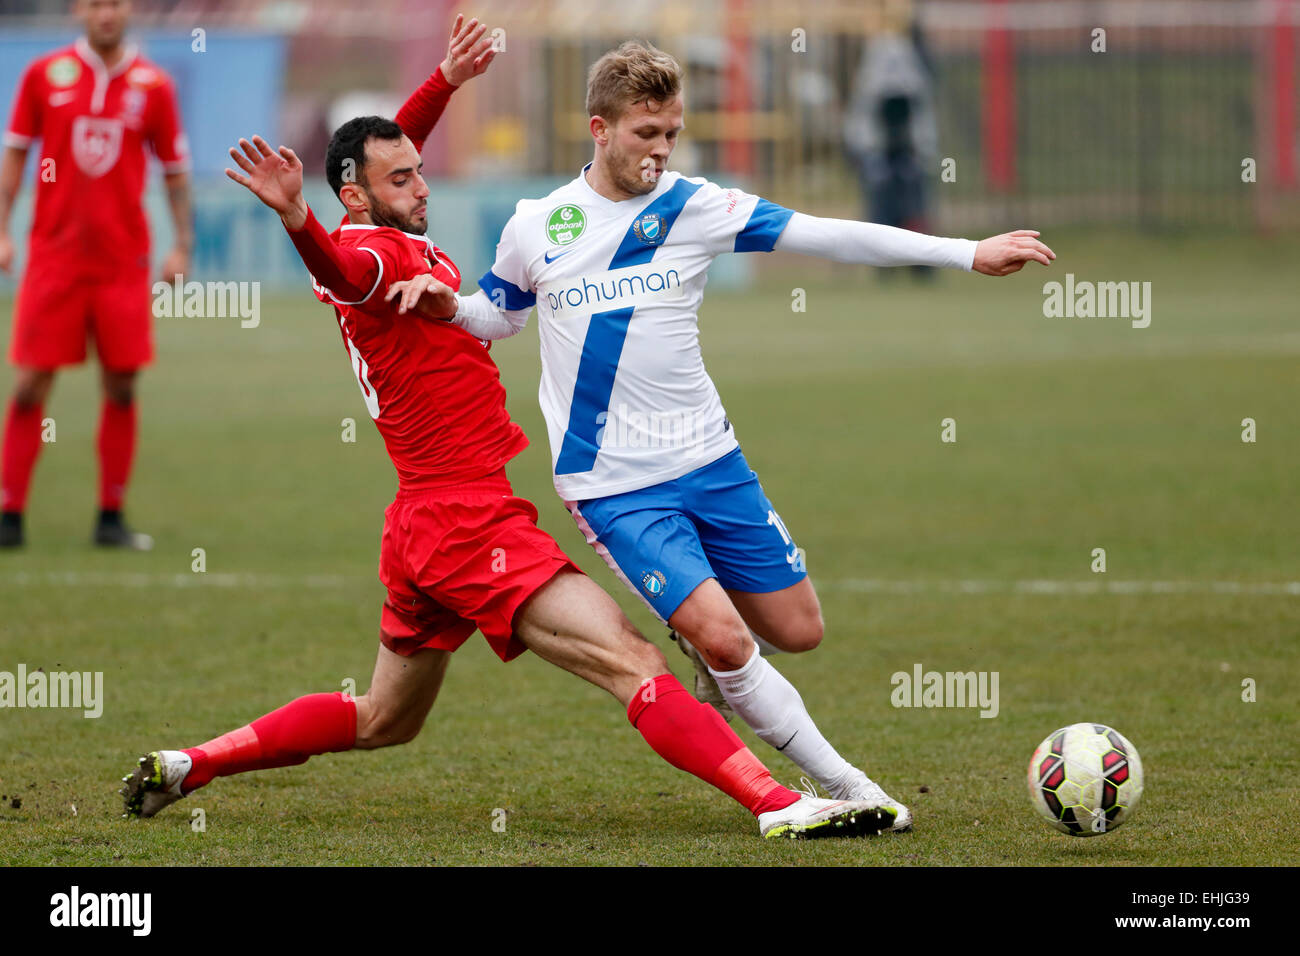 BUDAPEST, HUNGARY - MARCH 14, 2015: Daniel Vadnai of MTK (r) is tackled by Filipe Oliveira of Videoton during MTK vs. Videoton OTP Bank League football match in Bozsik Stadium. Stock Photo